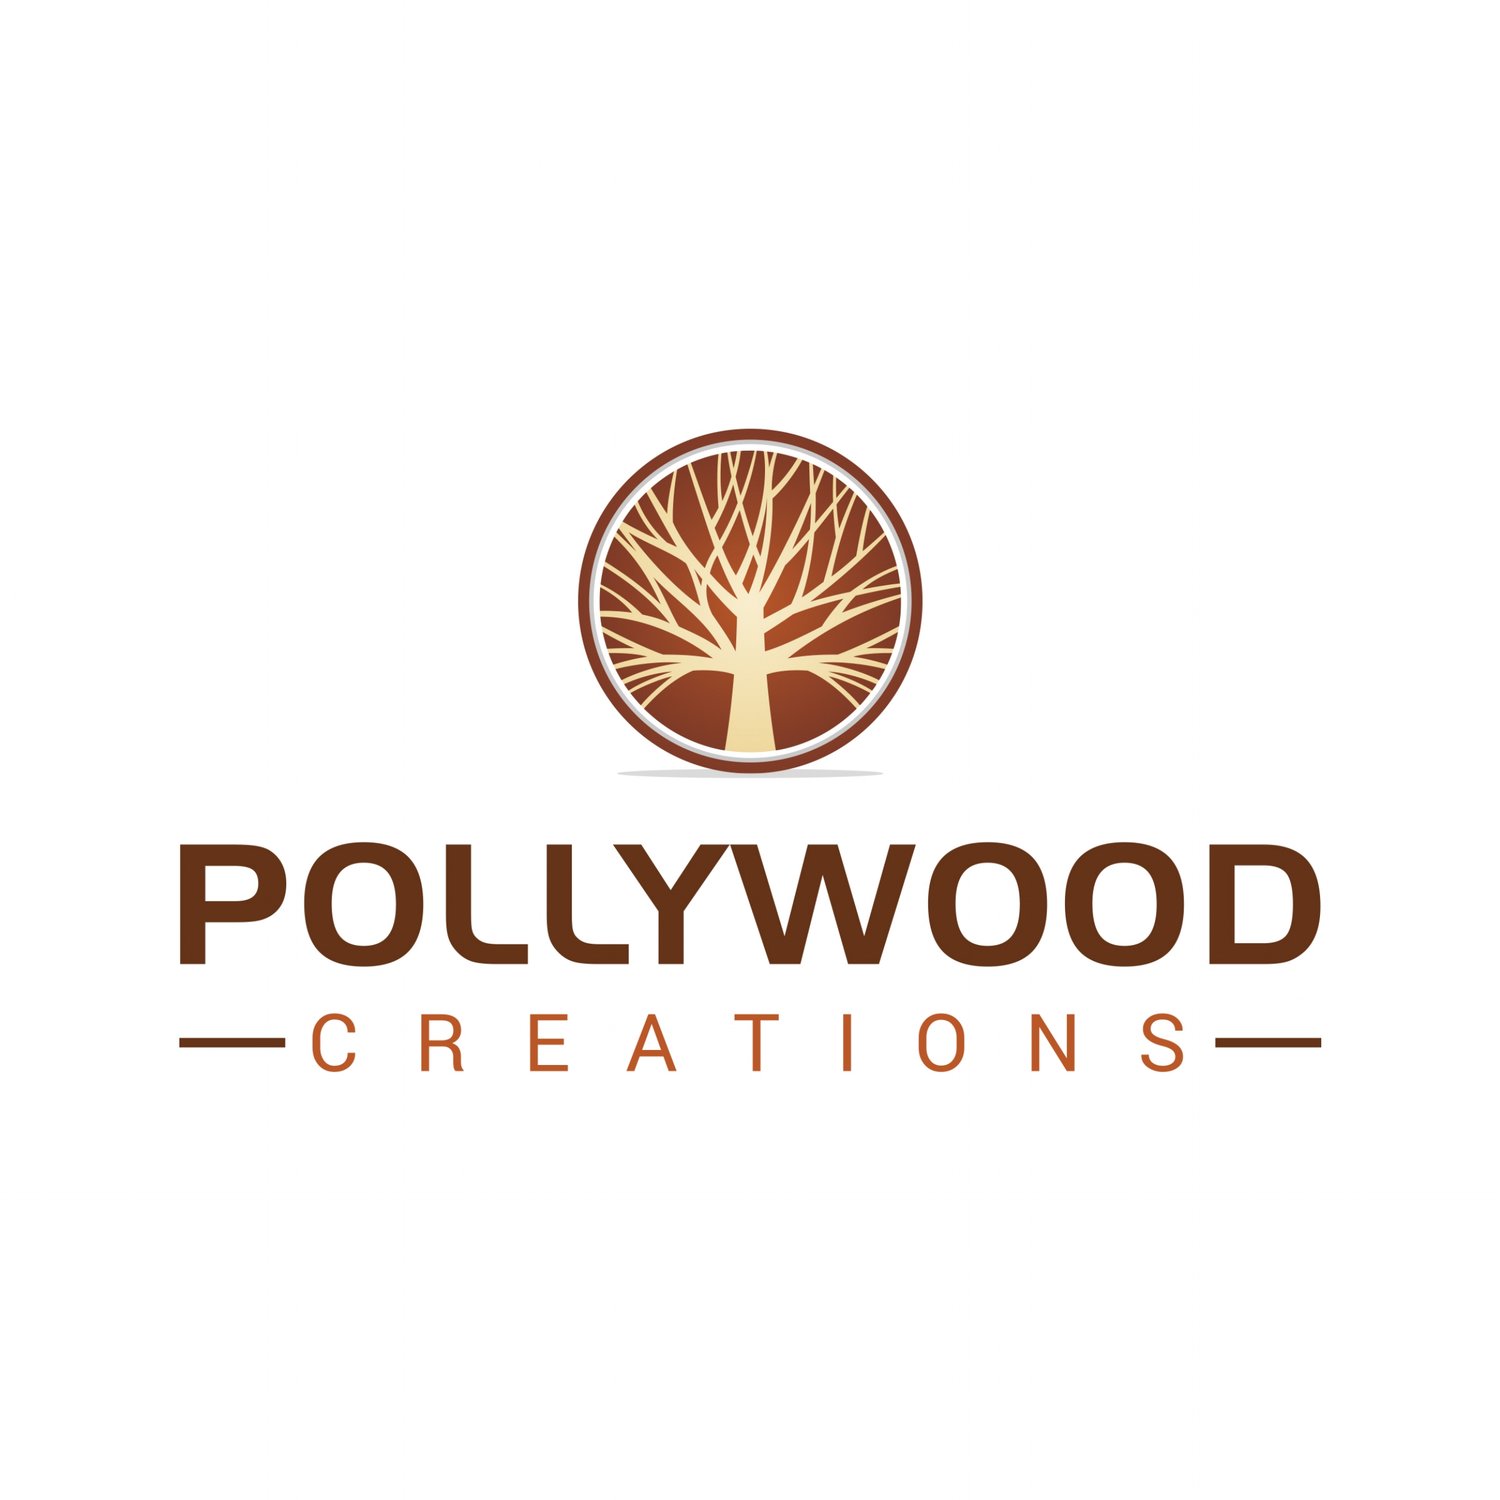 Pollywood Creations